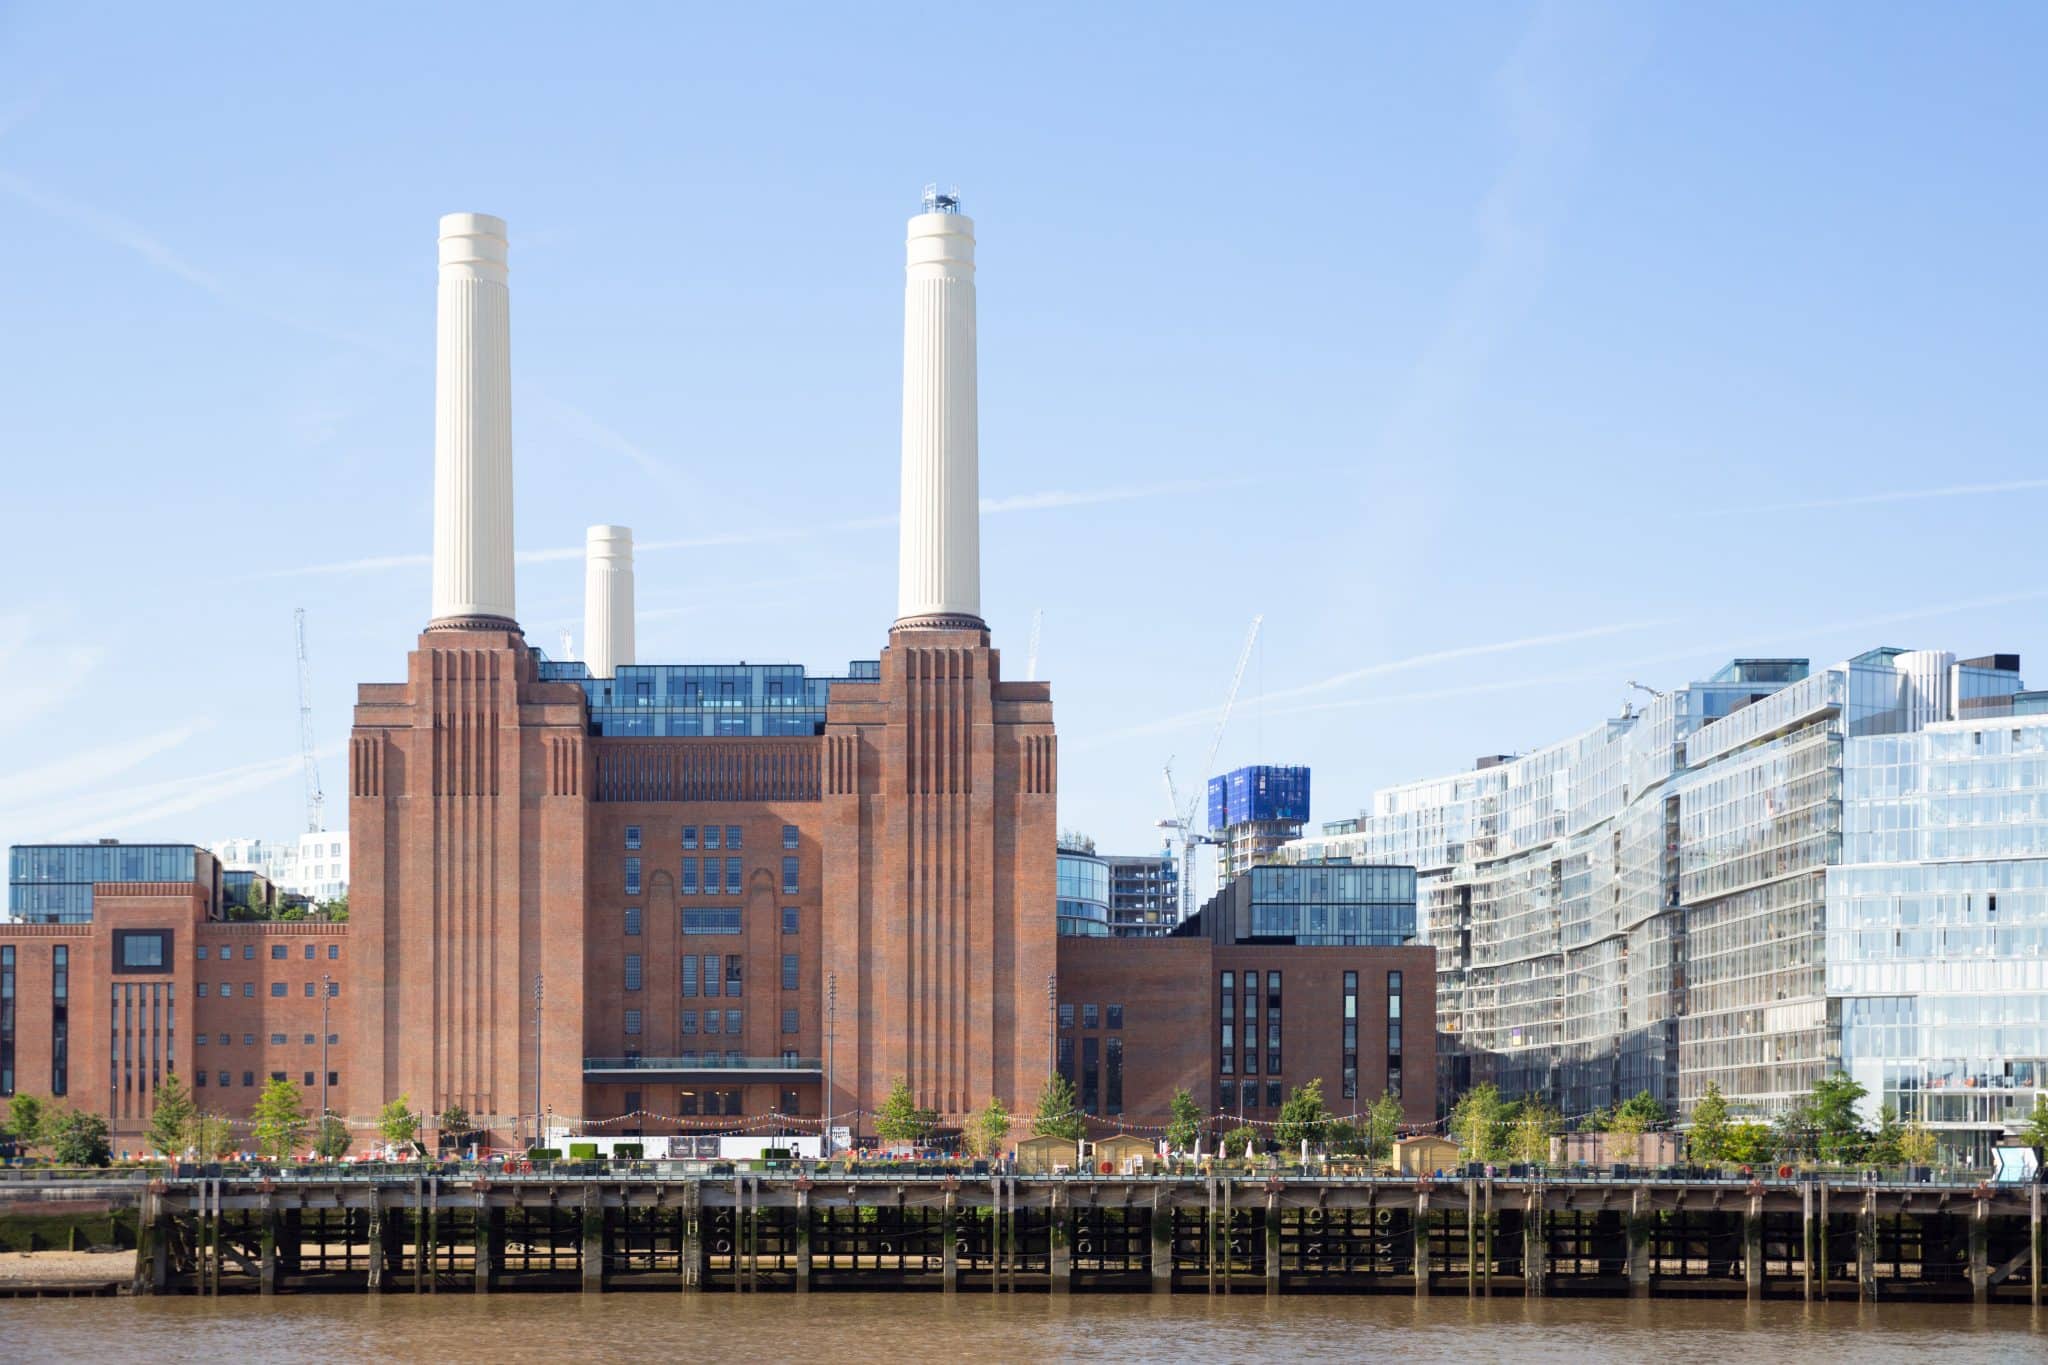 A photo of Battersea Power Station's exterior, with the LIFT faintly visible at the top of one of the chimneys